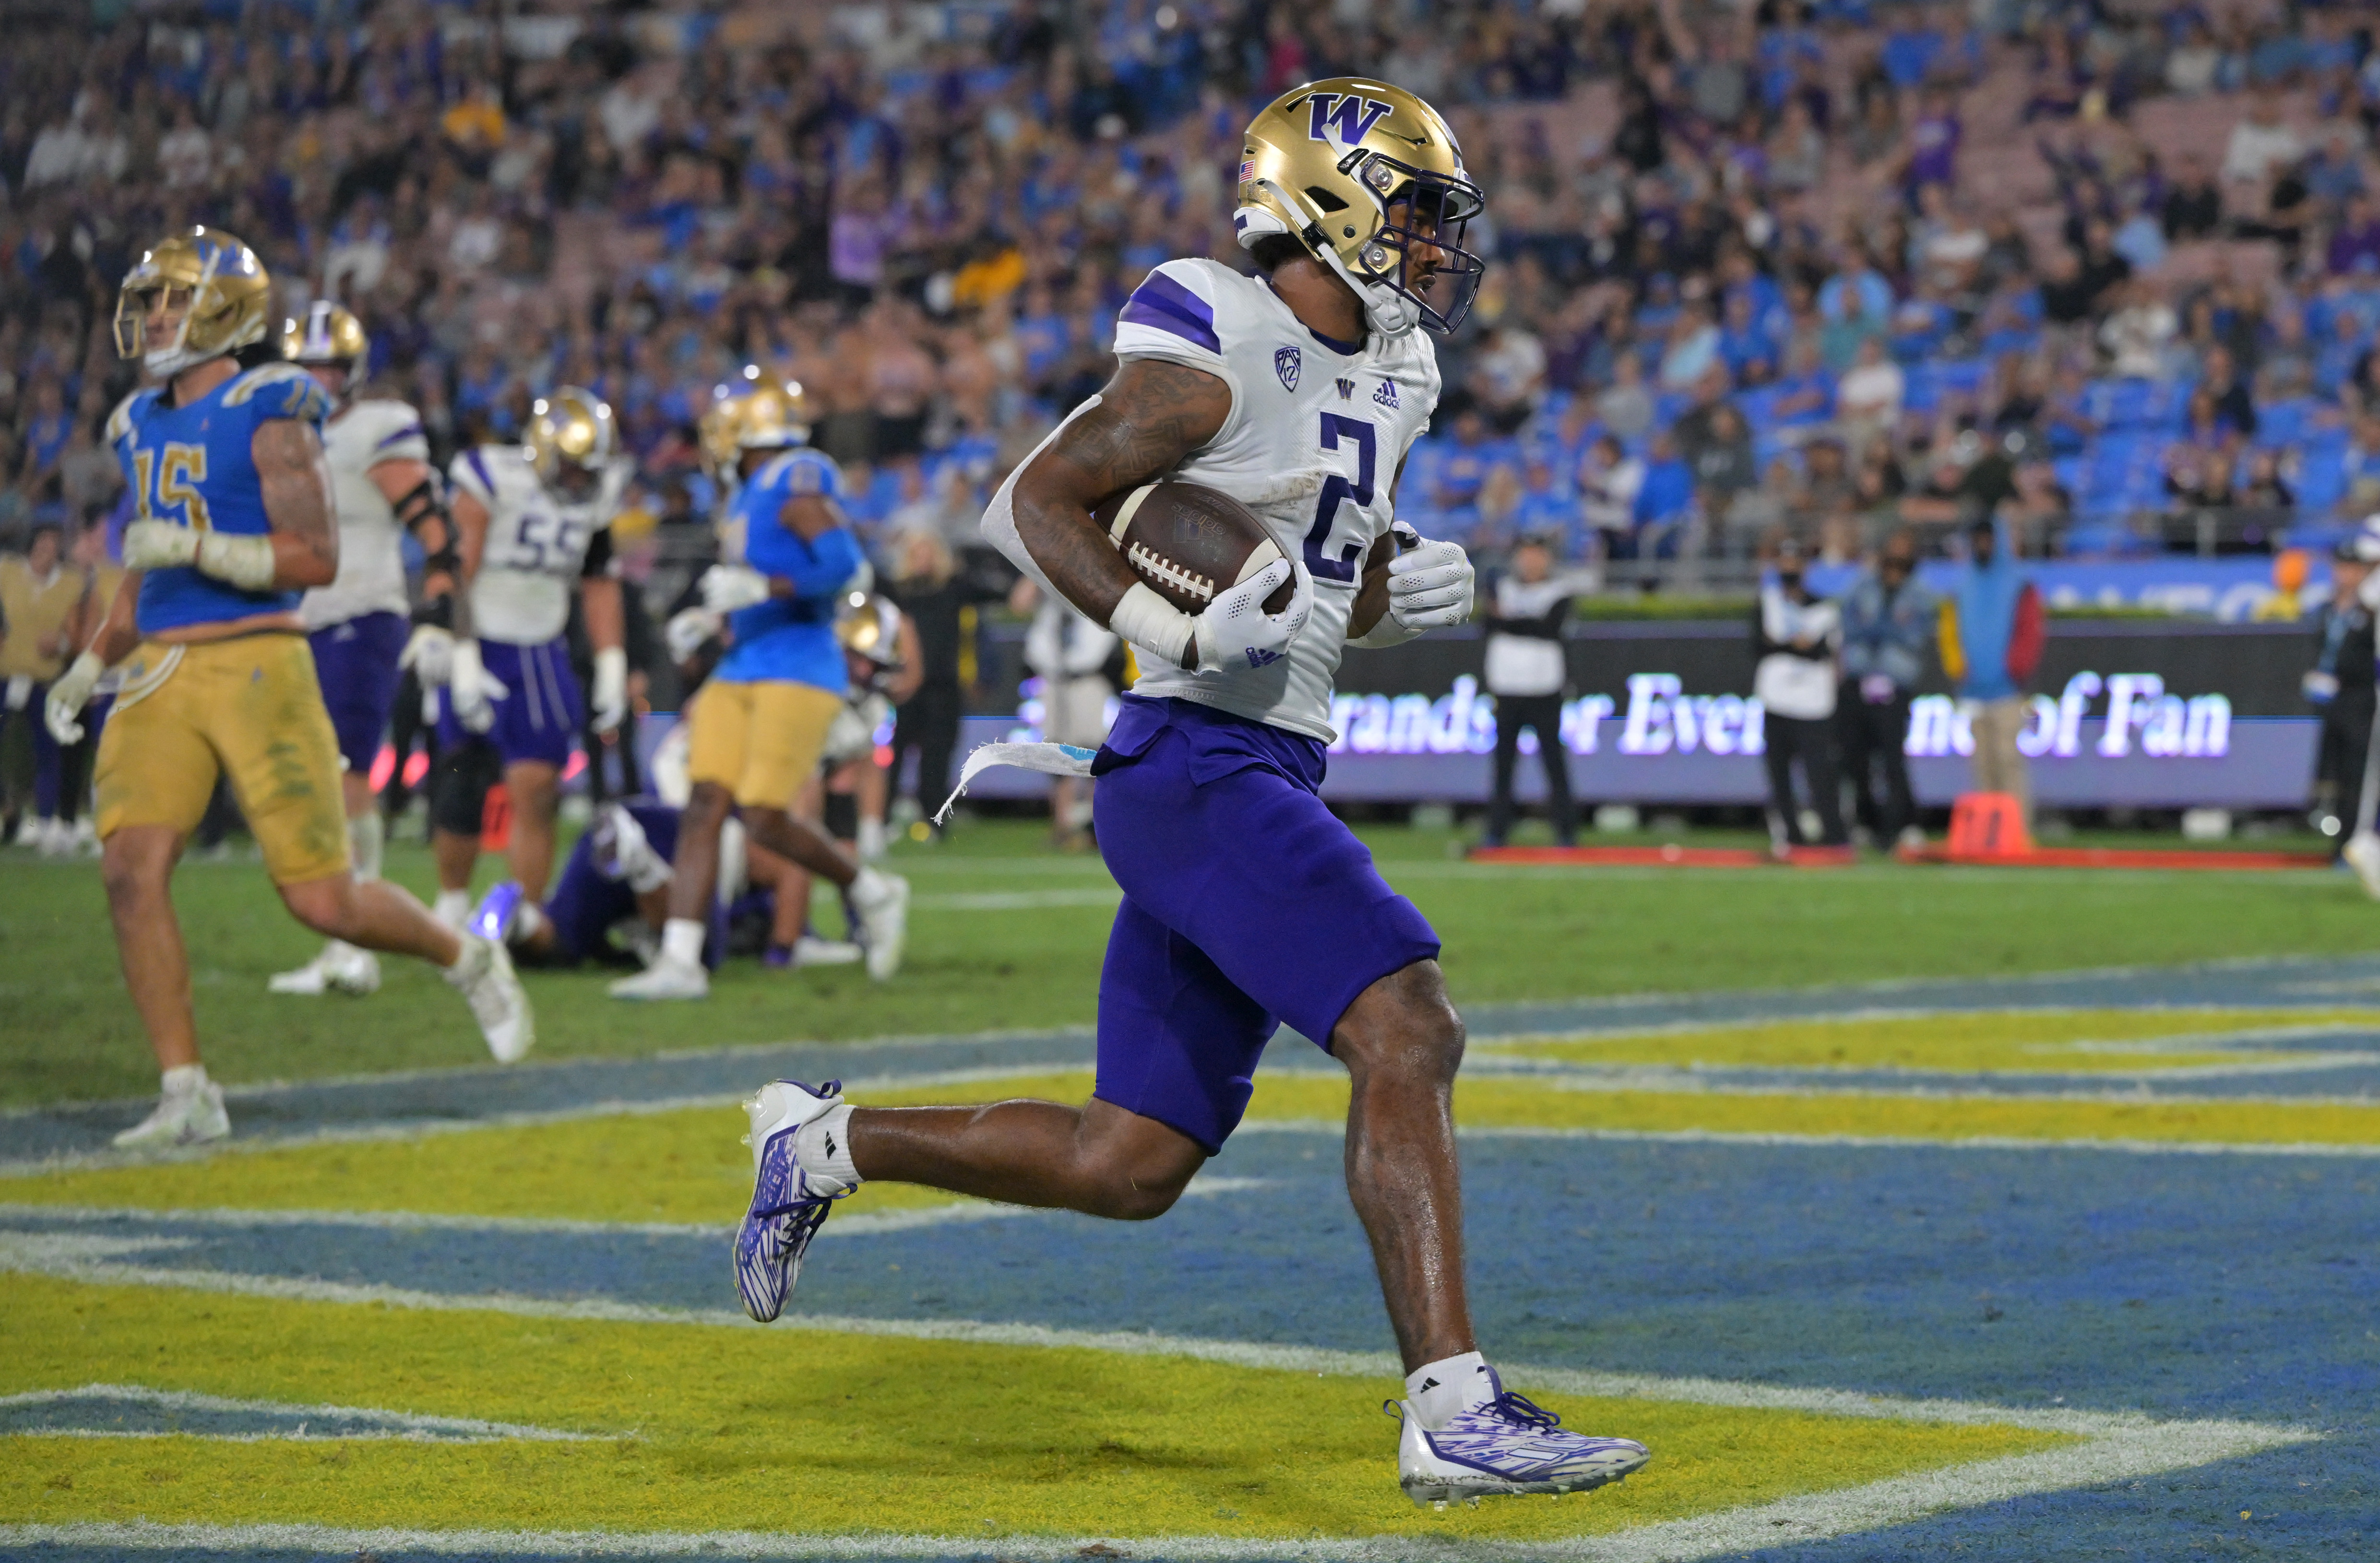 Sep 30, 2022; Pasadena, California, USA; Washington Huskies wide receiver Ja'Lynn Polk (2) runs into the end zone for a touchdown in the second half against the UCLA Bruins at the Rose Bowl. Mandatory Credit: Jayne Kamin-Oncea-USA TODAY Sports